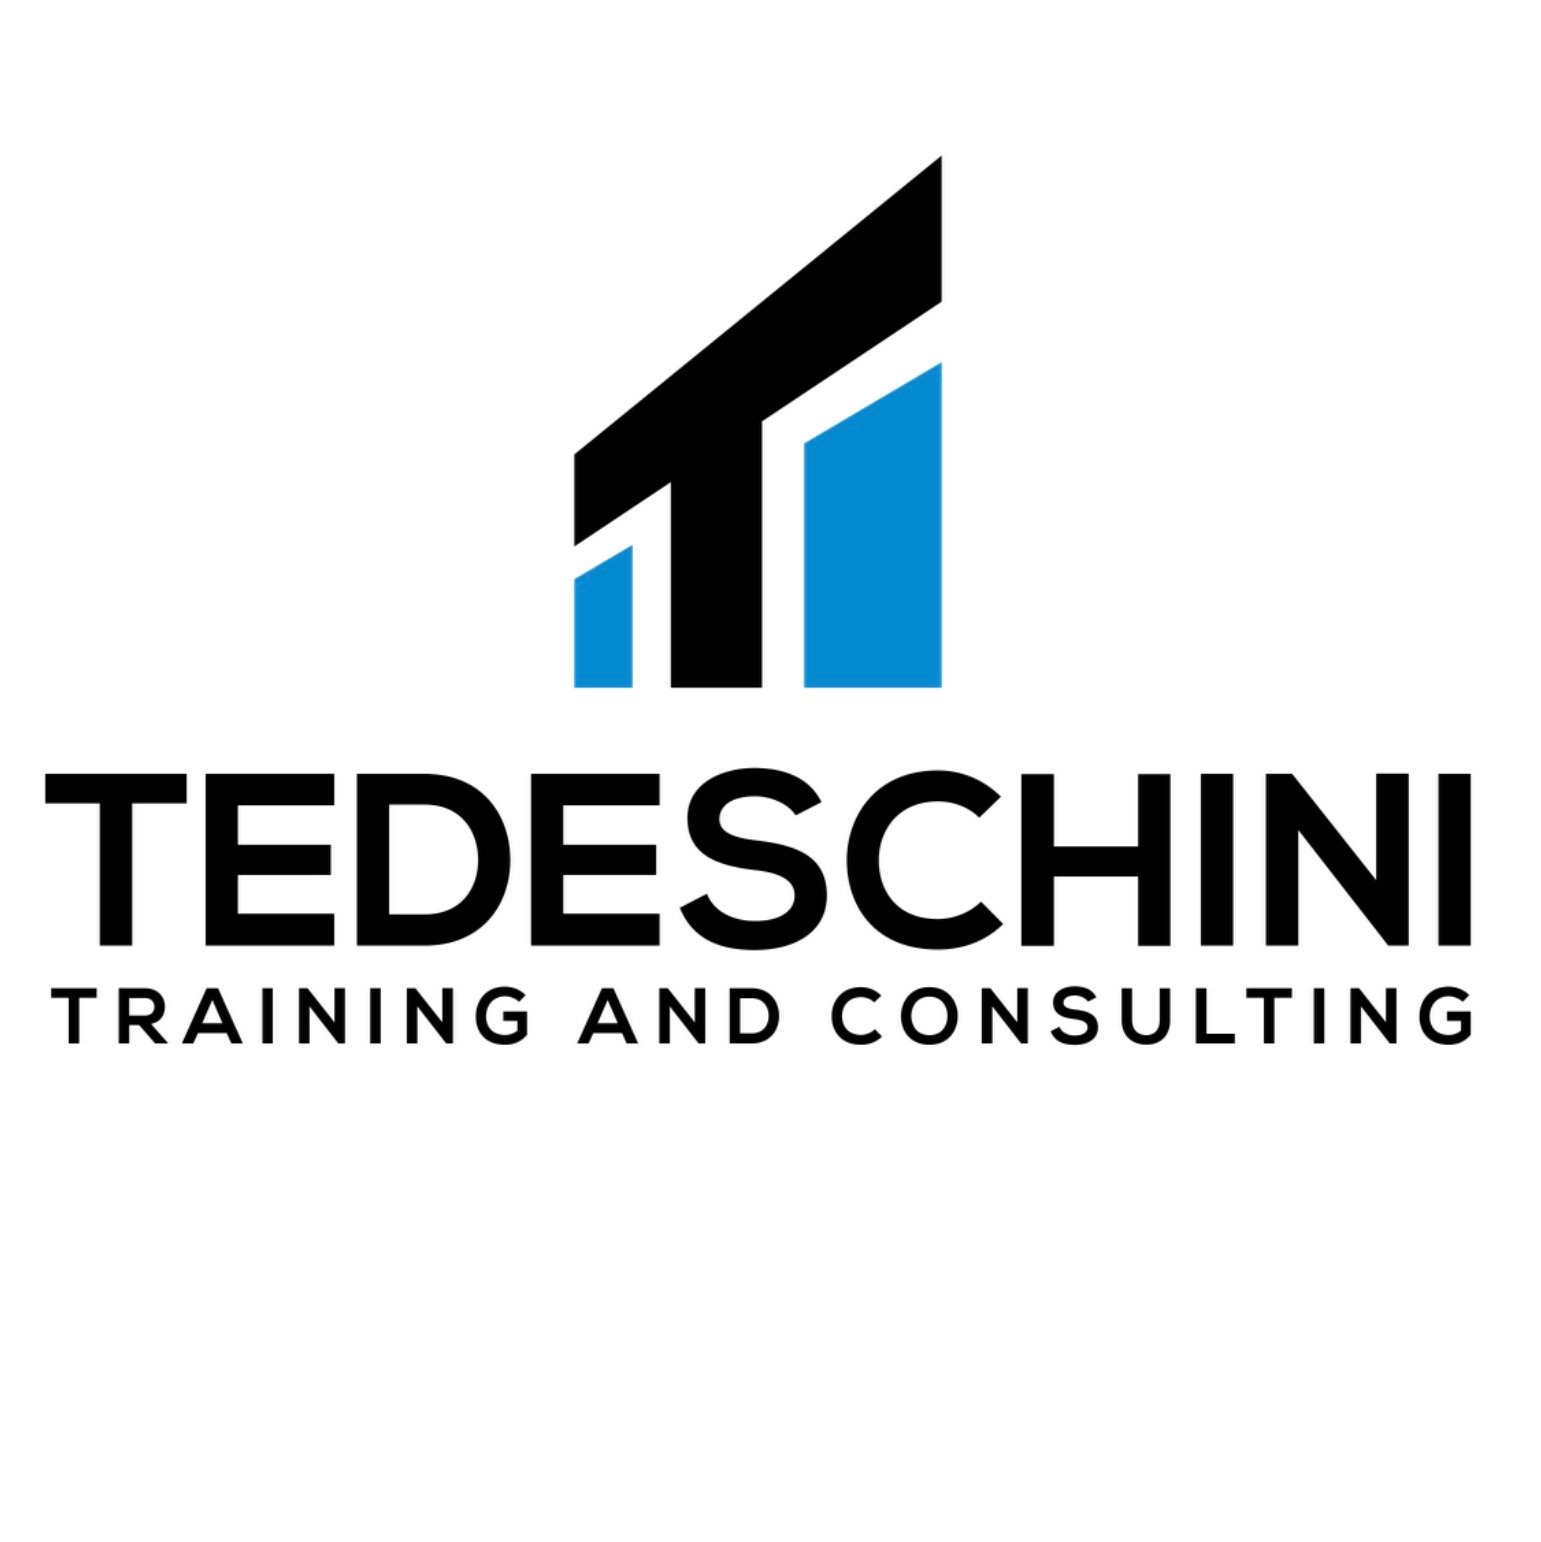 Tedeschini Training and Consulting